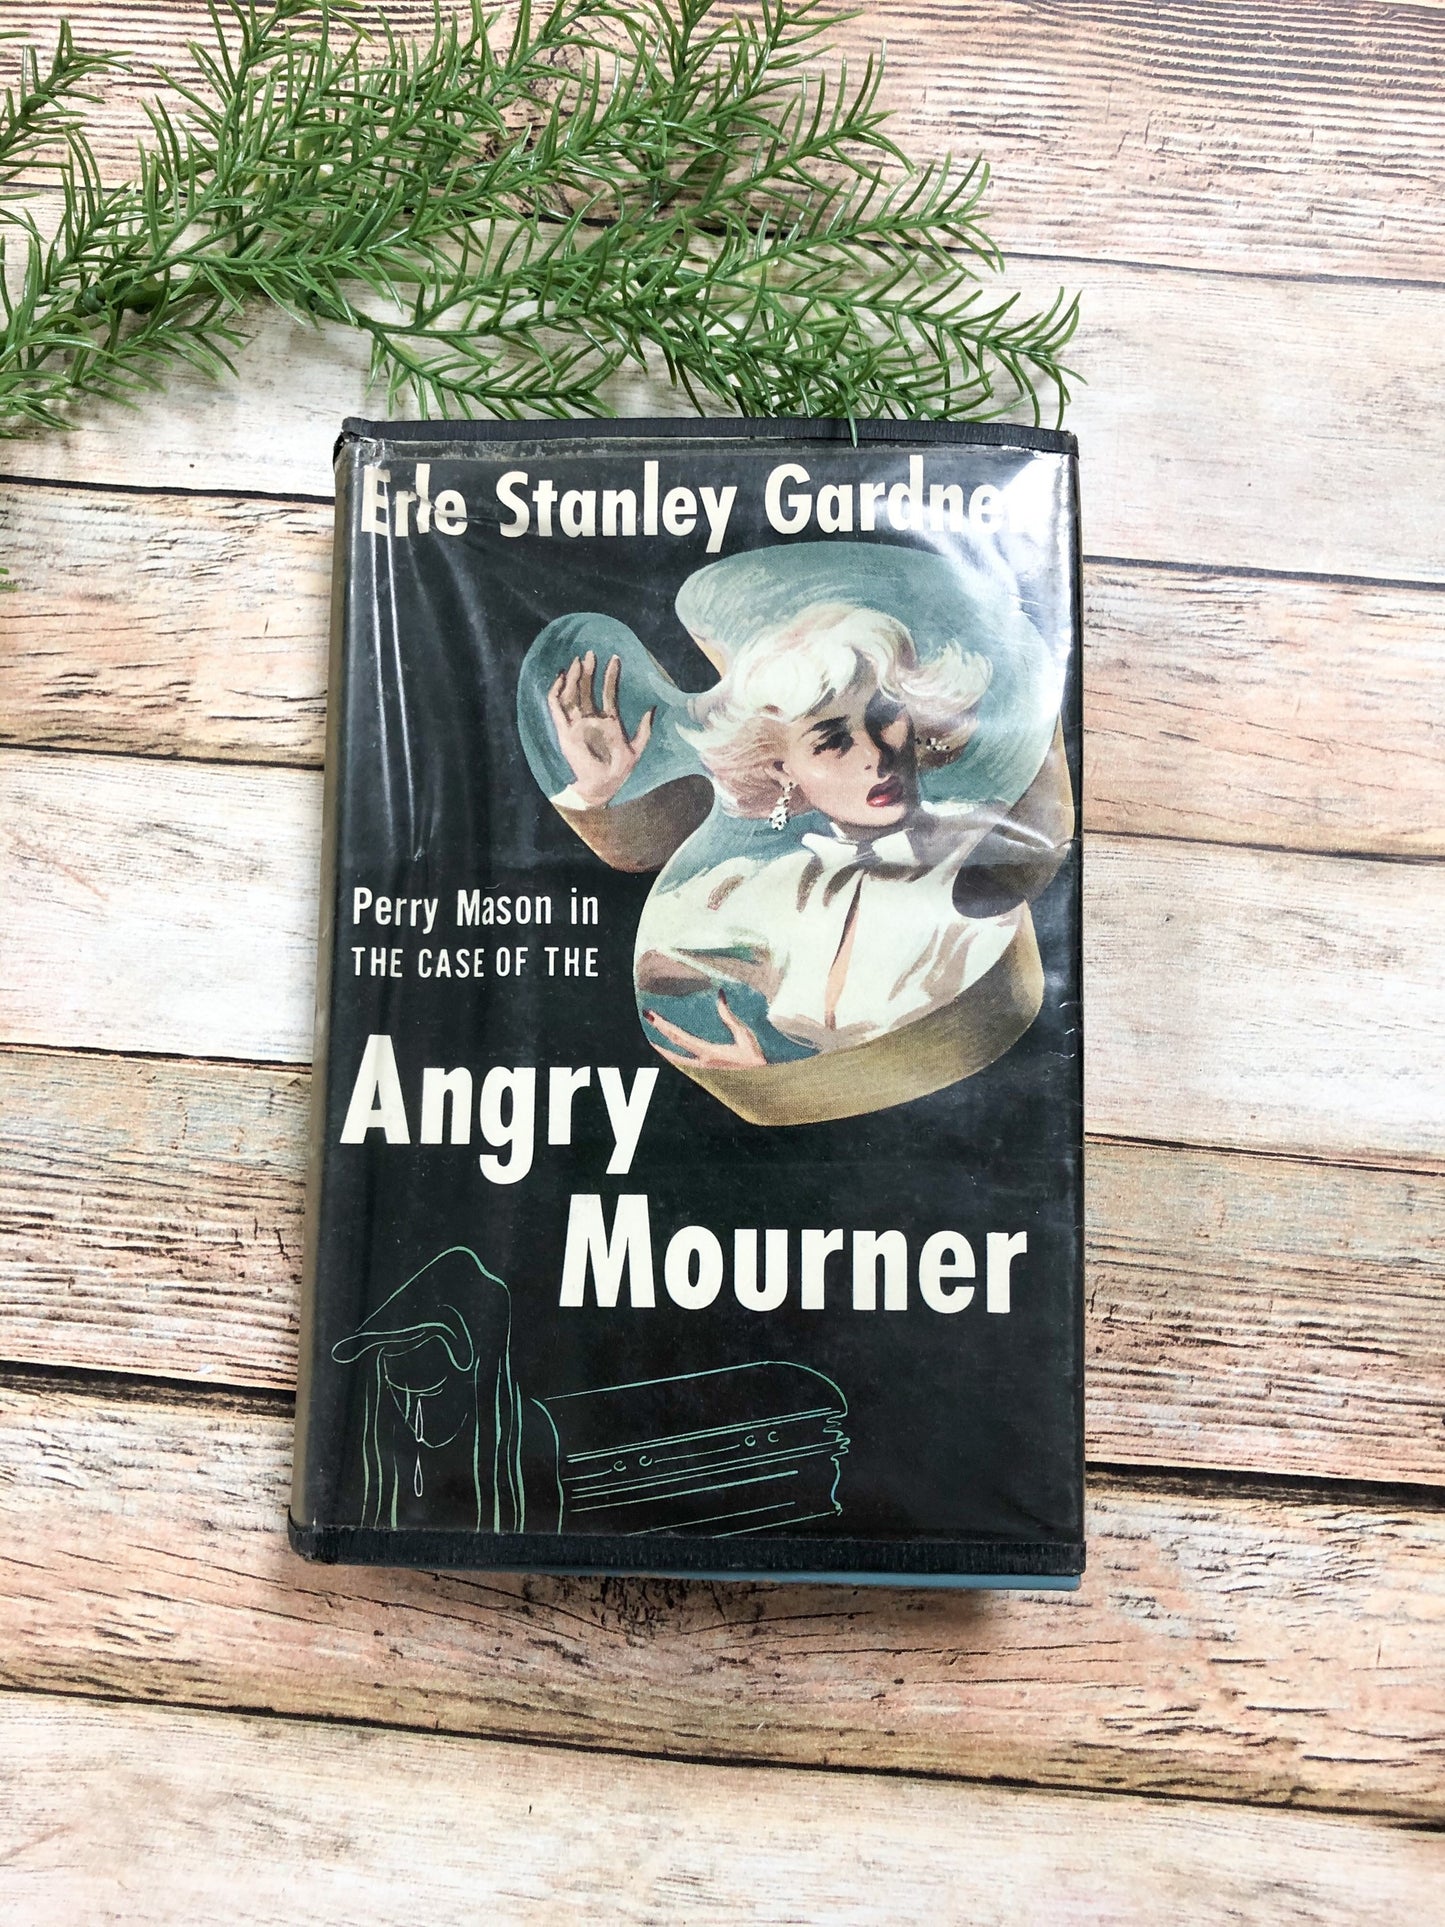 First Edition Erle Stanley Gardner, The Case of the Angry Mourner